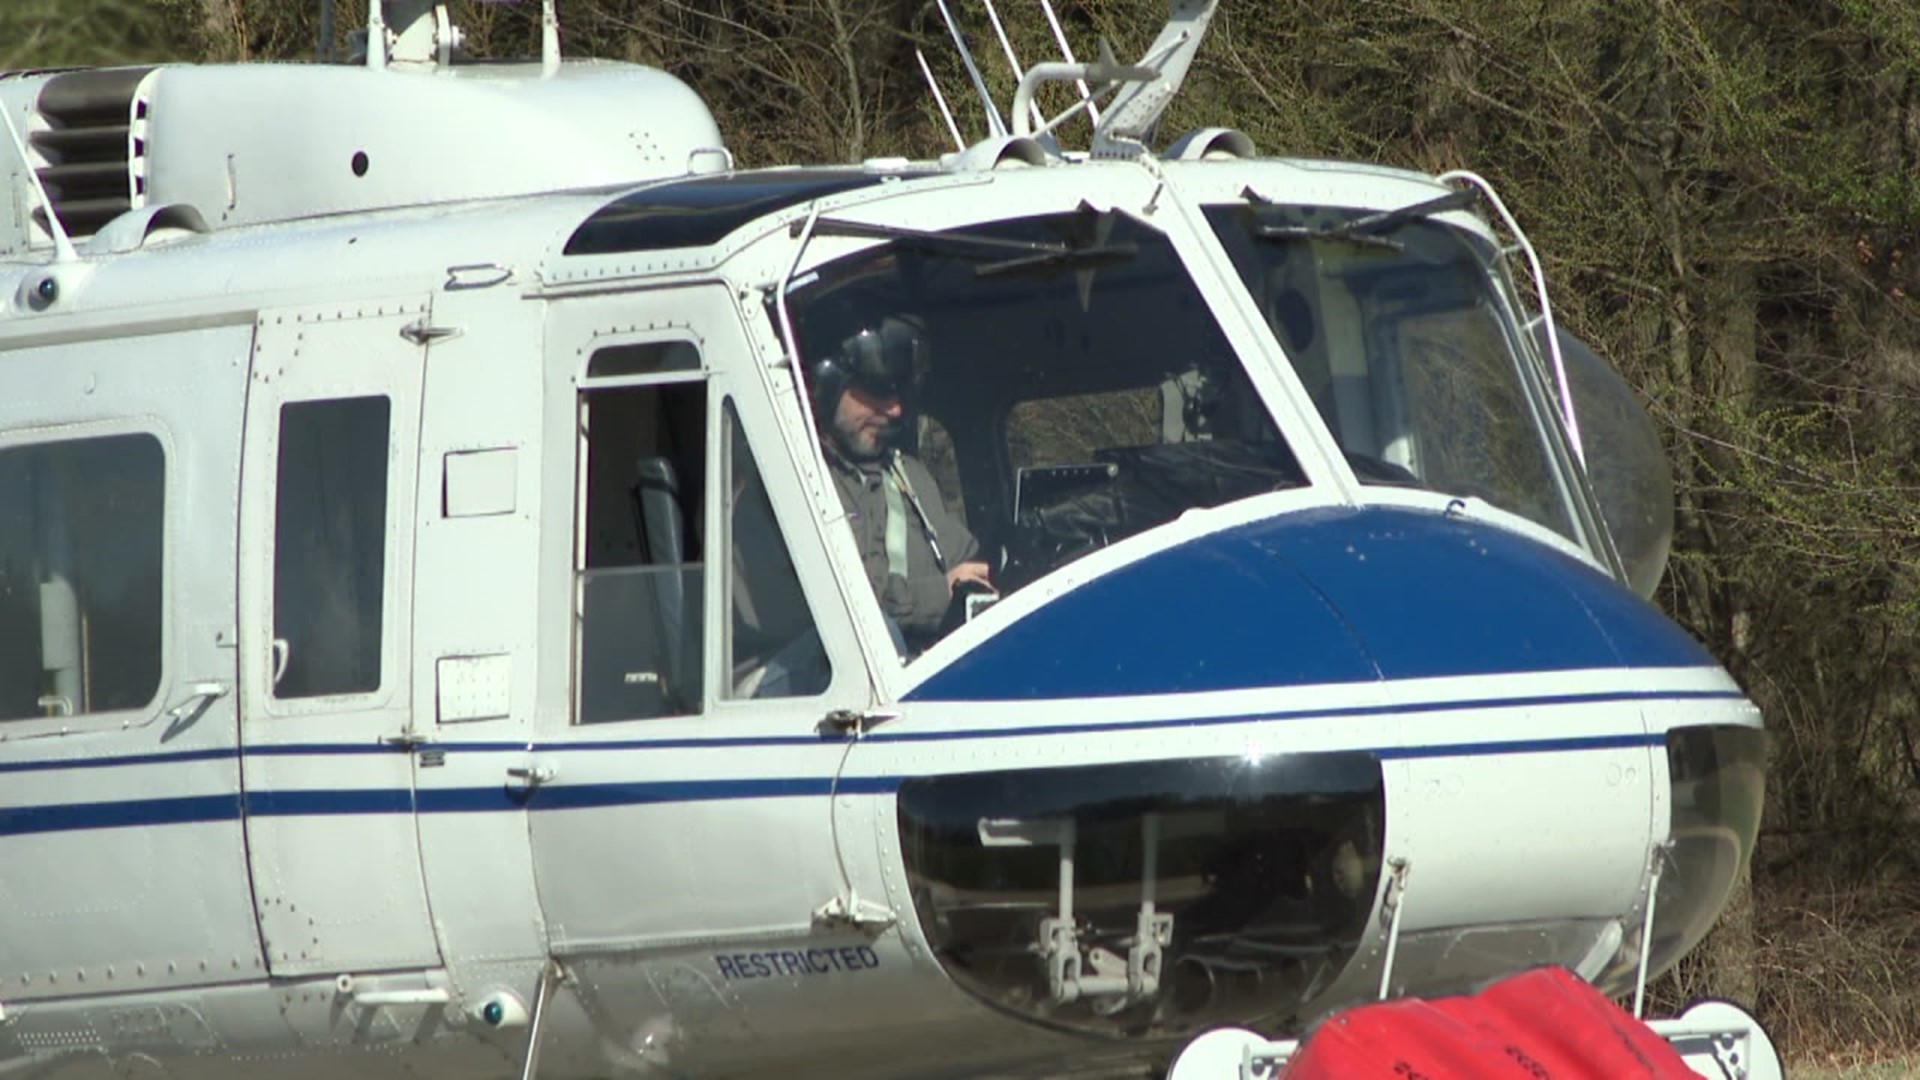 Newswatch 16's Jack Culkin spoke with the pilot of one of our area's several brush fire helicopters.